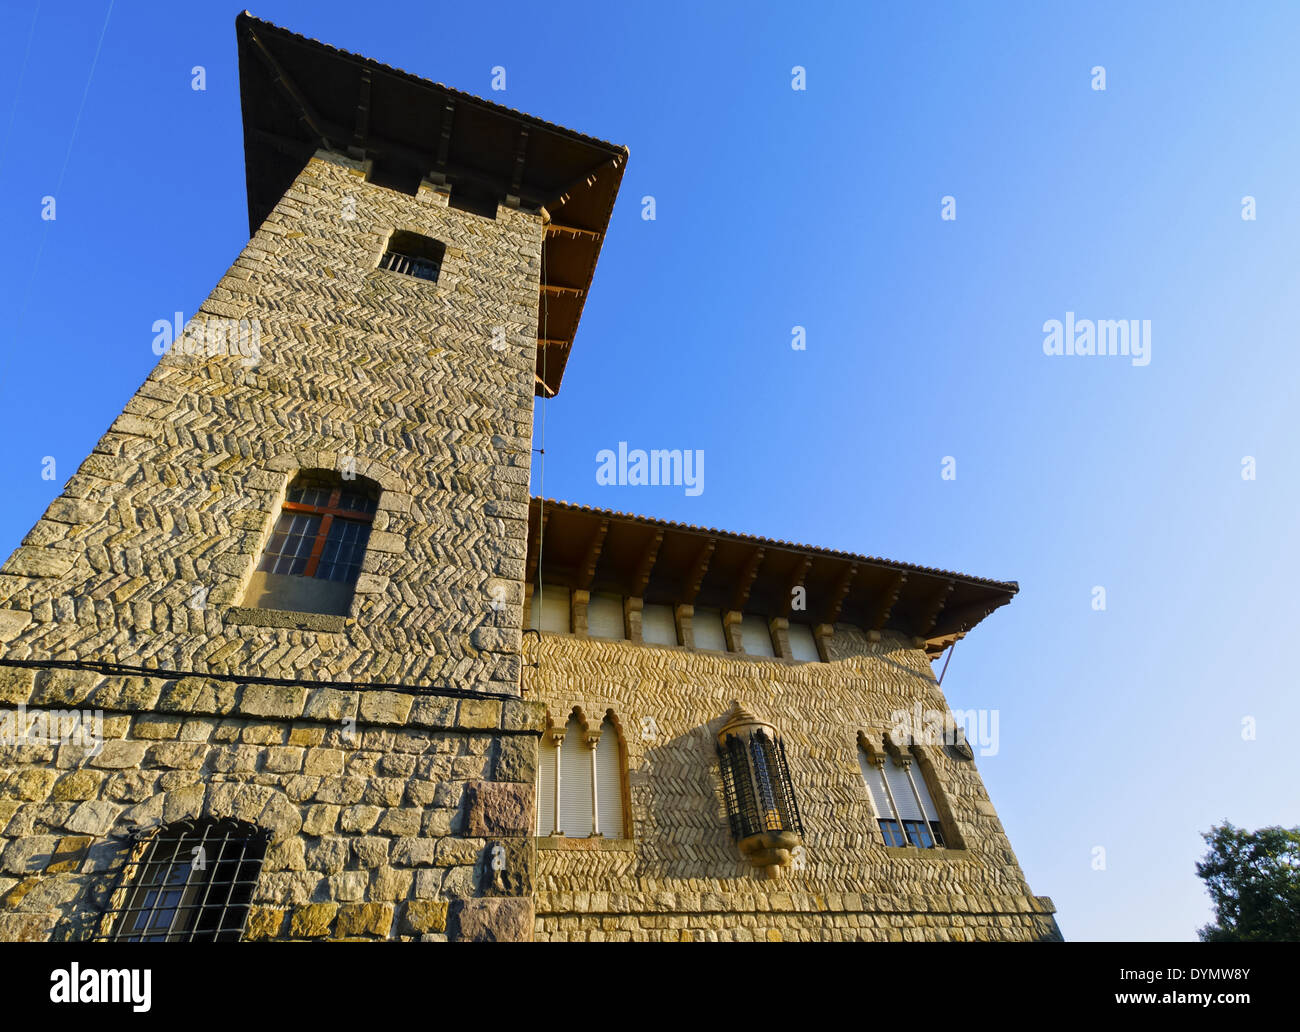 Typical Building on Tibidabo Mountain in Barcelona, Catalonia, Spain Stock Photo